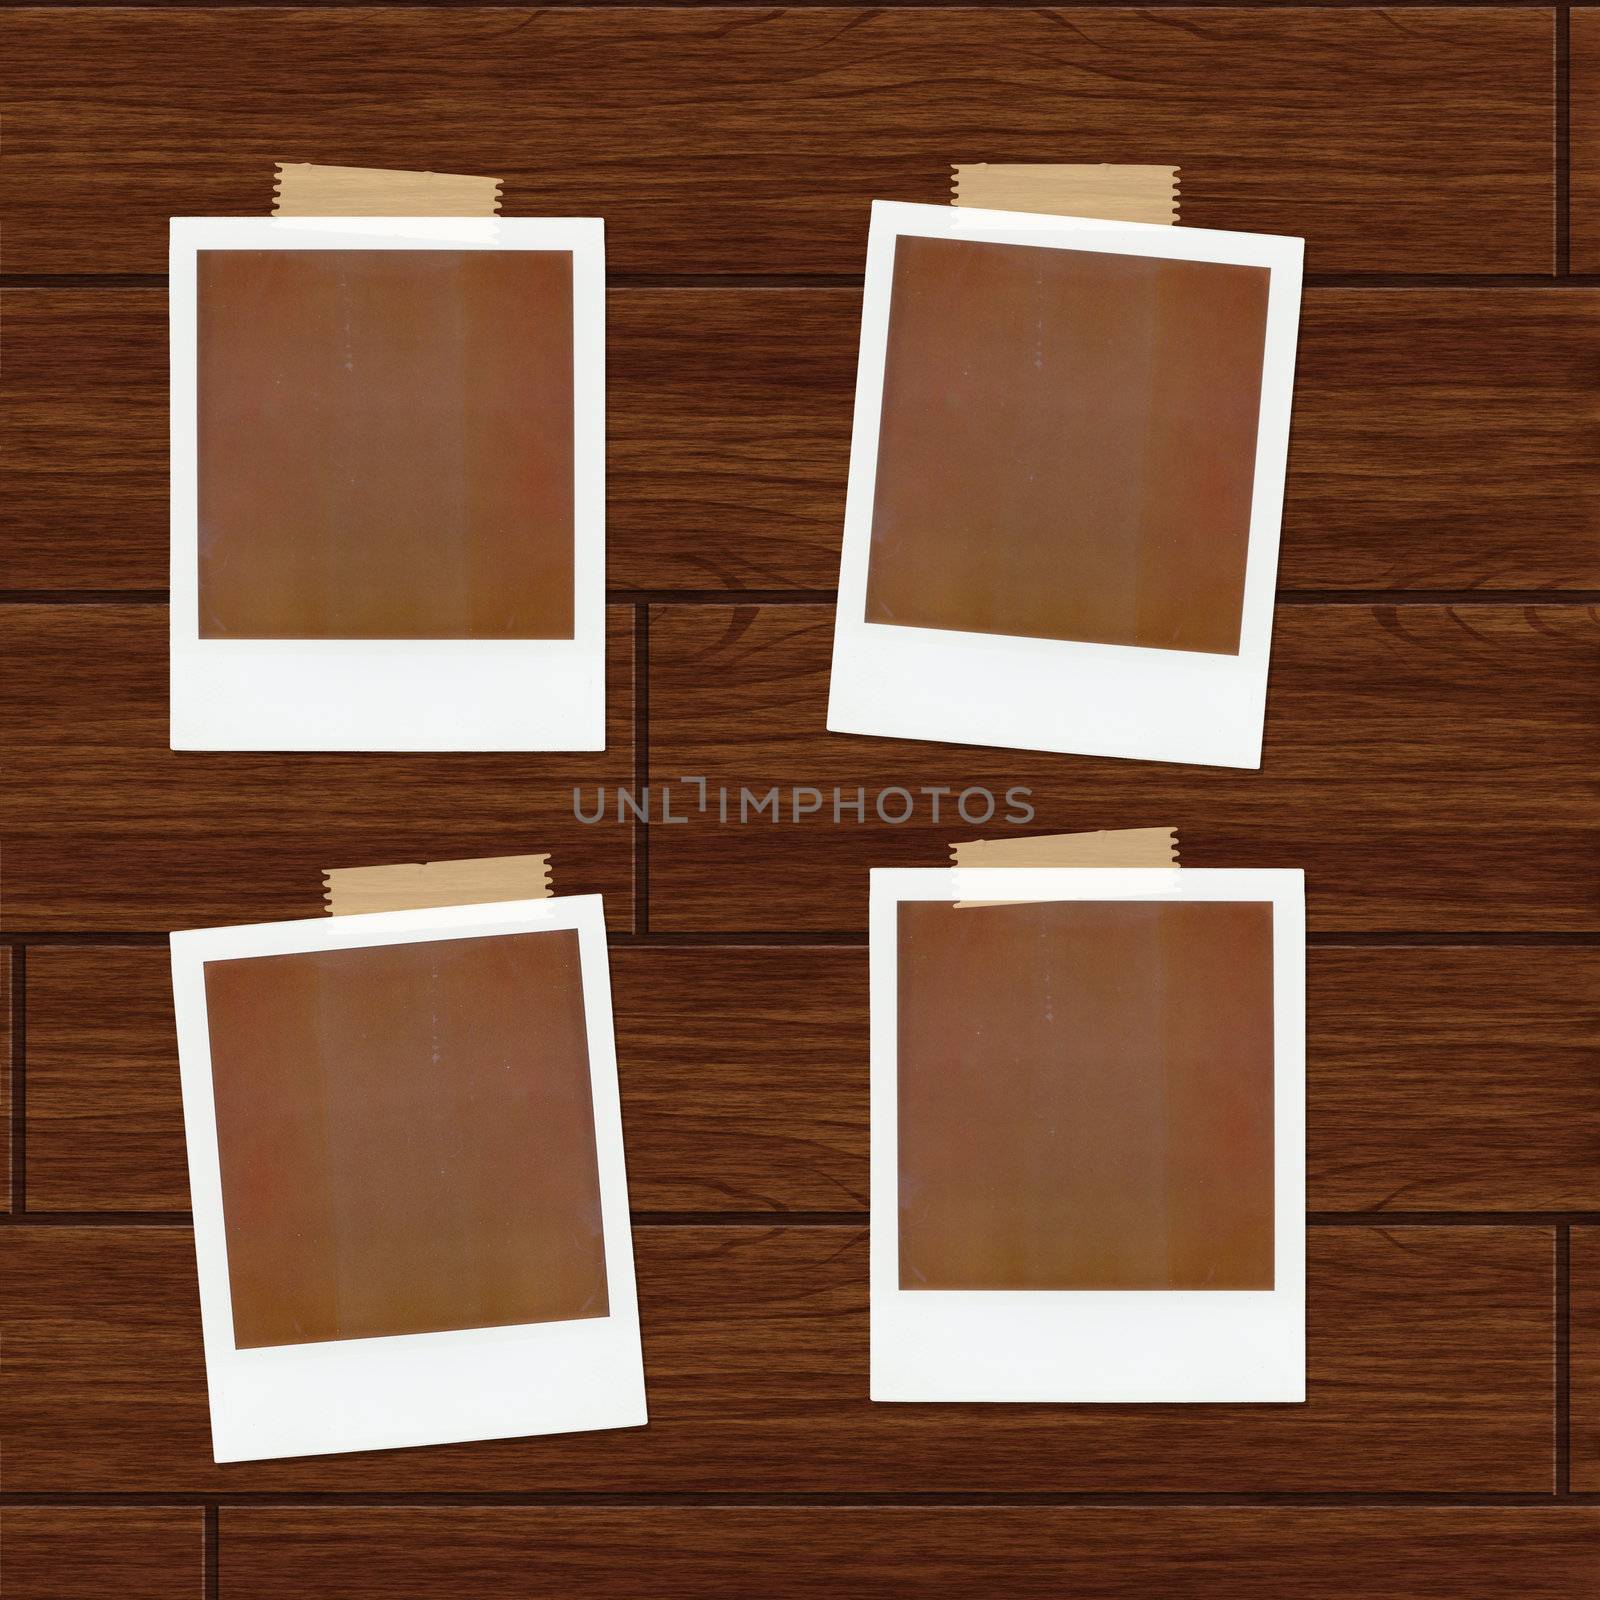 Photos placeholders over a wooden background